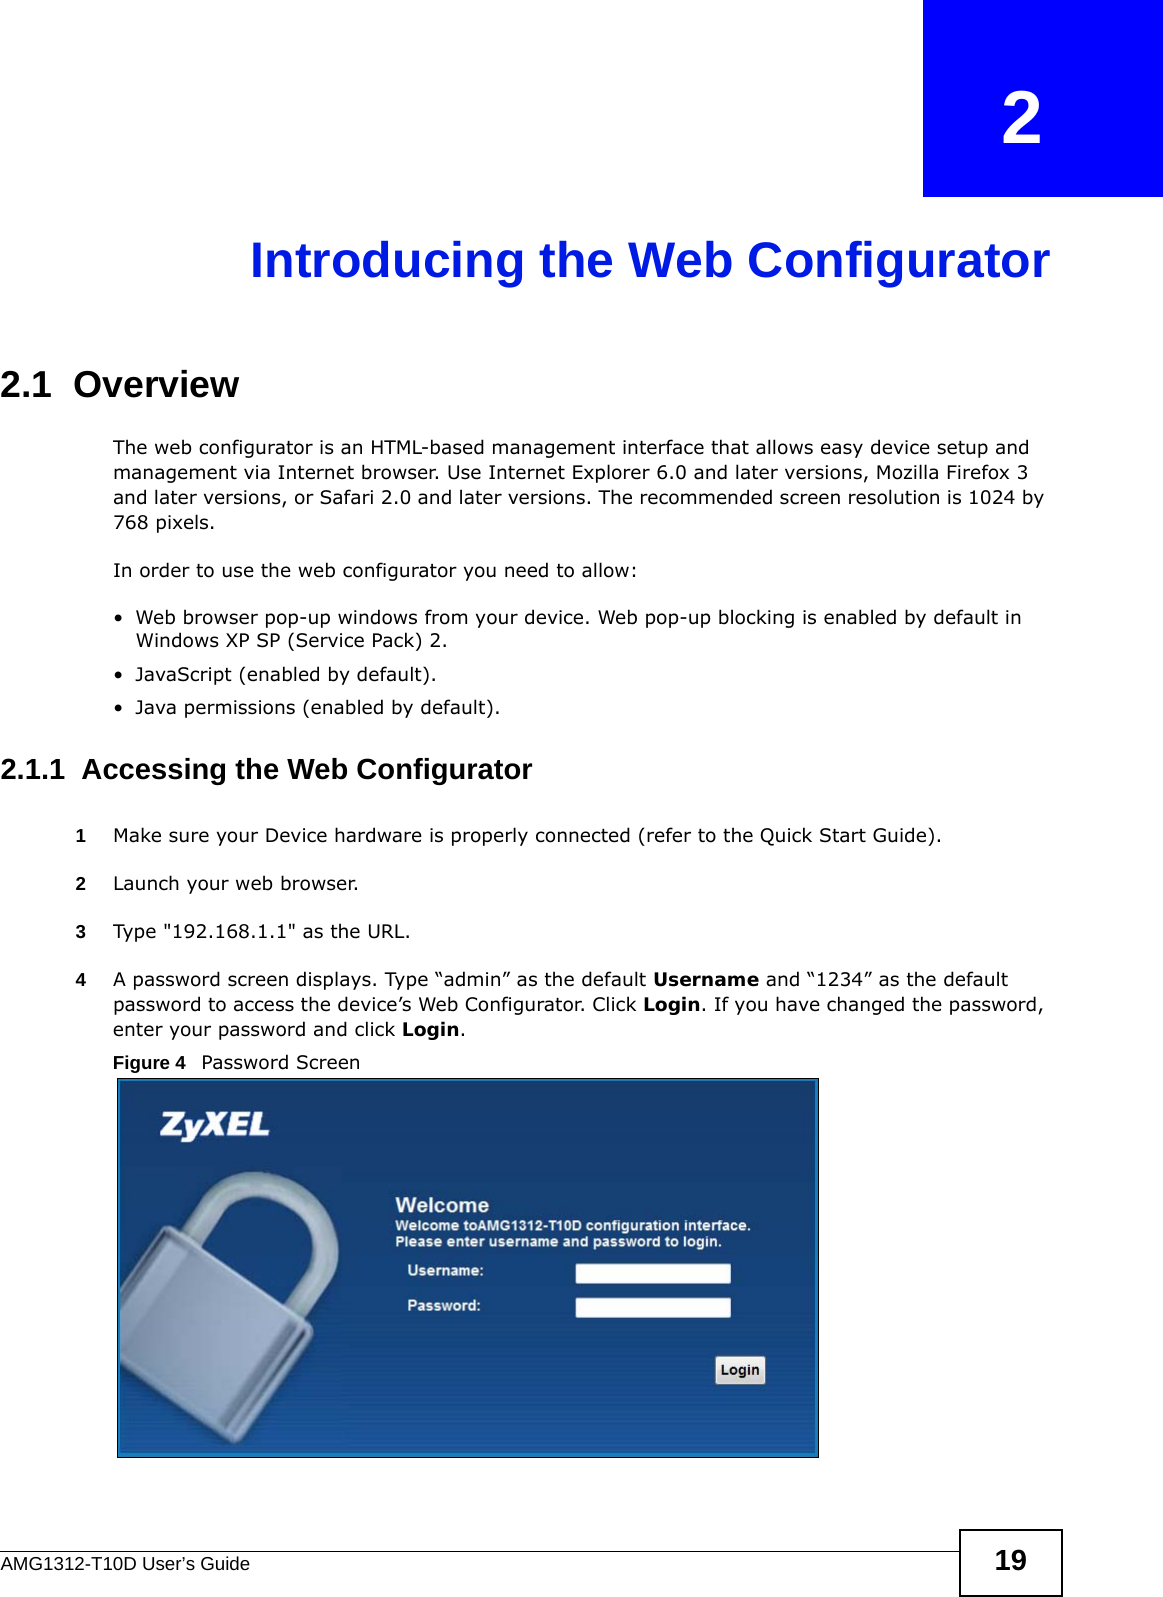 AMG1312-T10D User’s Guide 19CHAPTER   2Introducing the Web Configurator2.1  OverviewThe web configurator is an HTML-based management interface that allows easy device setup and management via Internet browser. Use Internet Explorer 6.0 and later versions, Mozilla Firefox 3 and later versions, or Safari 2.0 and later versions. The recommended screen resolution is 1024 by 768 pixels.In order to use the web configurator you need to allow:• Web browser pop-up windows from your device. Web pop-up blocking is enabled by default in Windows XP SP (Service Pack) 2.• JavaScript (enabled by default).• Java permissions (enabled by default).2.1.1  Accessing the Web Configurator1Make sure your Device hardware is properly connected (refer to the Quick Start Guide).2Launch your web browser.3Type &quot;192.168.1.1&quot; as the URL.4A password screen displays. Type “admin” as the default Username and “1234” as the default password to access the device’s Web Configurator. Click Login. If you have changed the password, enter your password and click Login.Figure 4   Password Screen